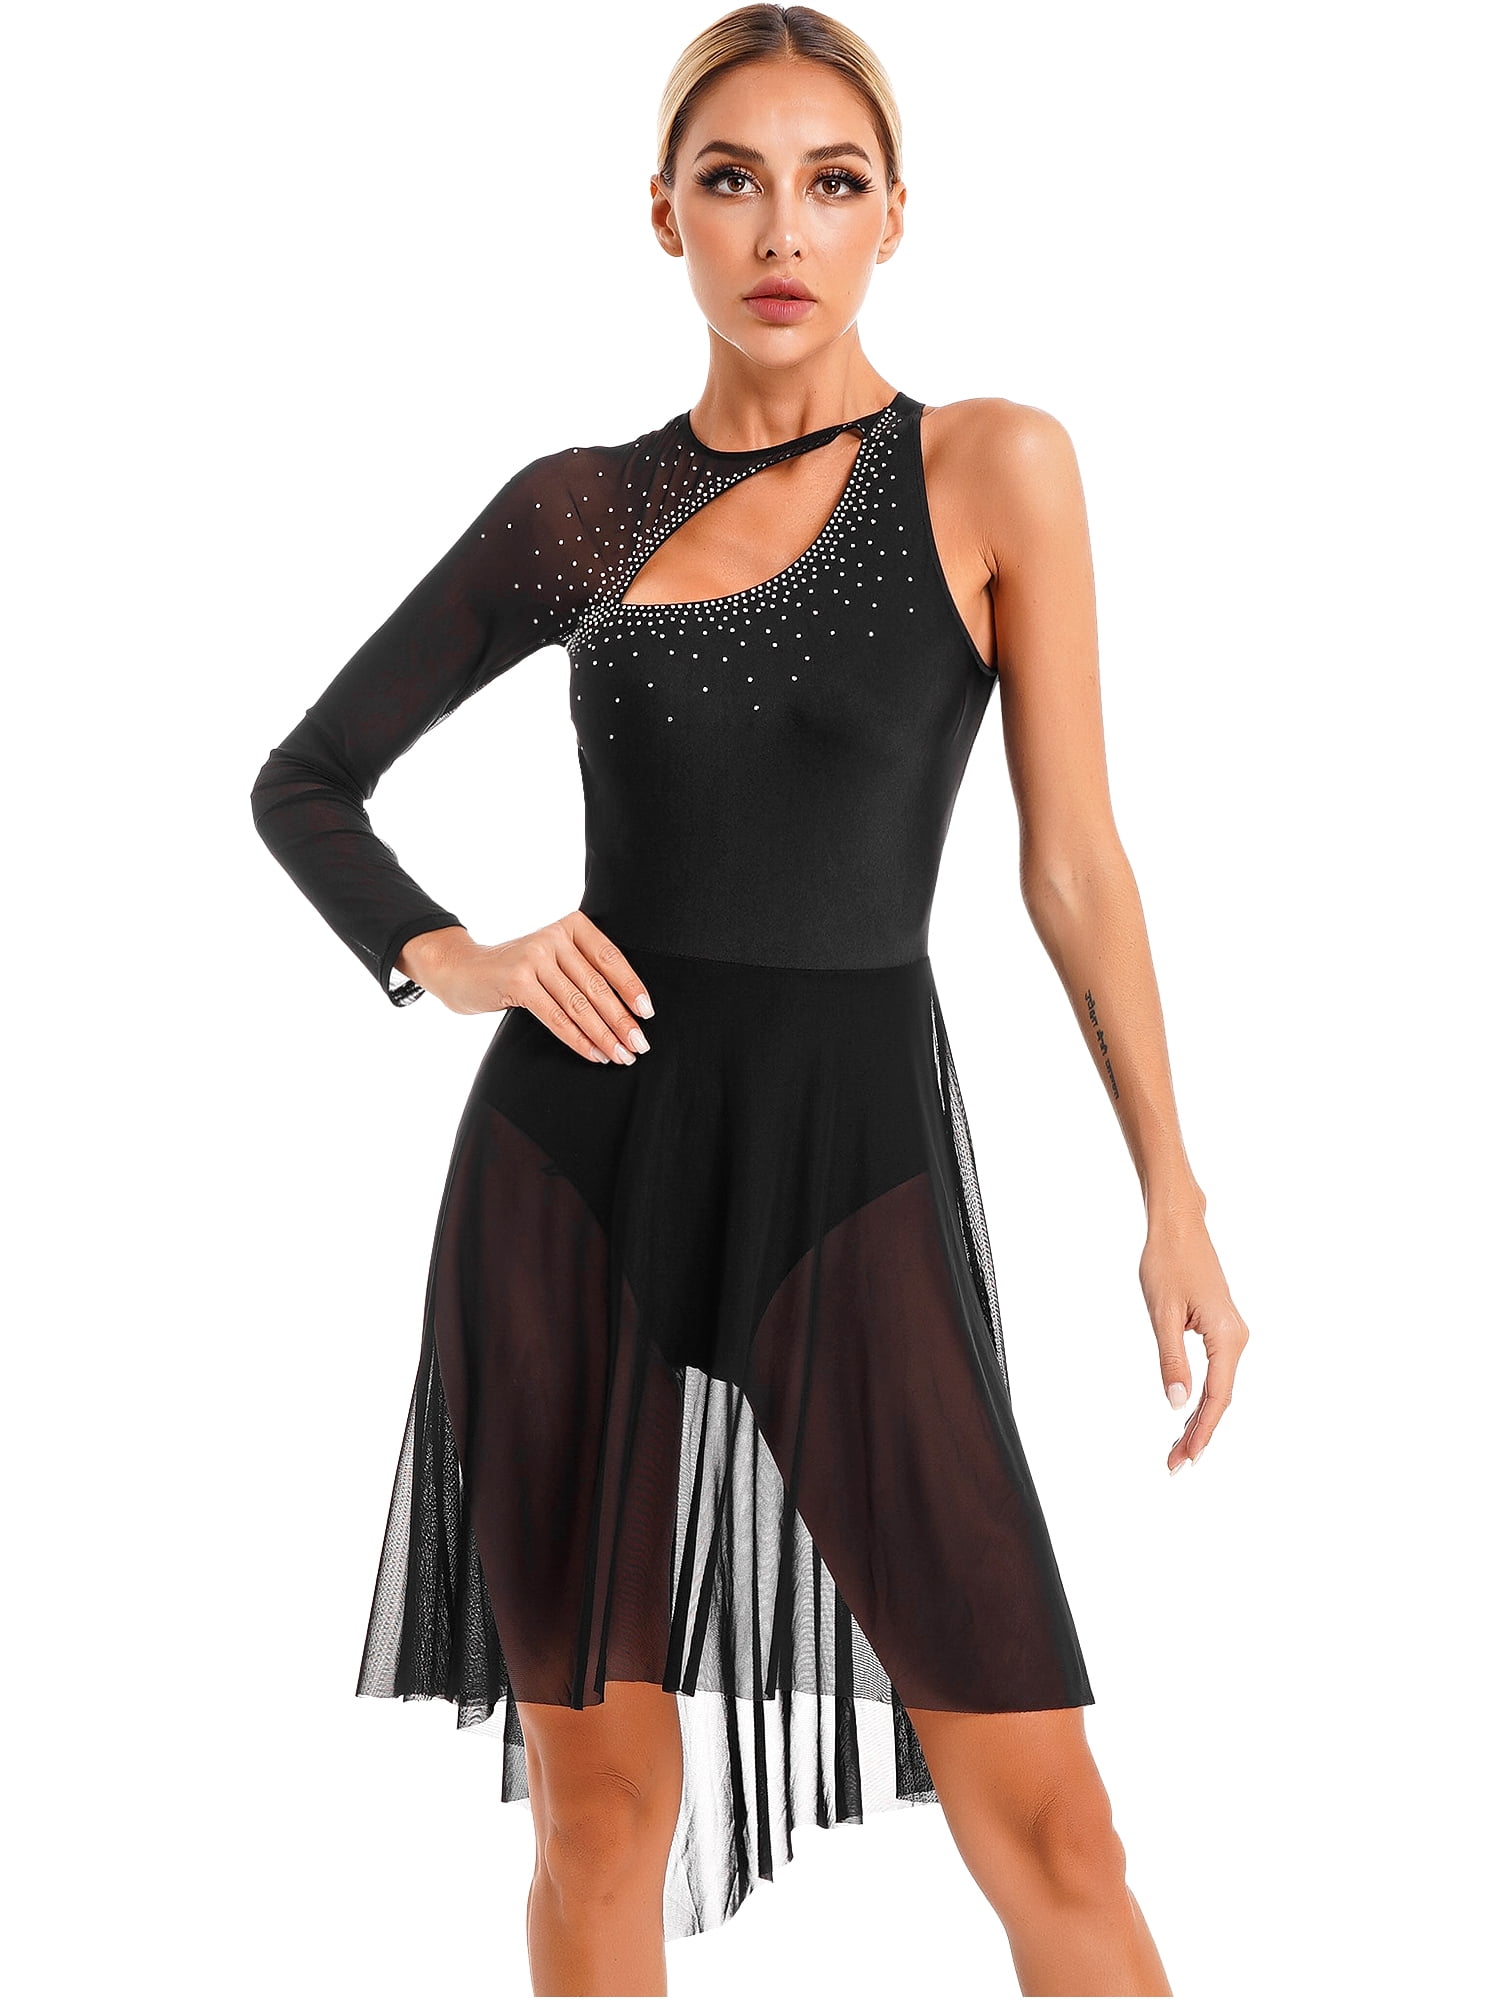 IEFIEL Womens Sheer Mesh Lyrical Contemporary Dance Leotard with ...